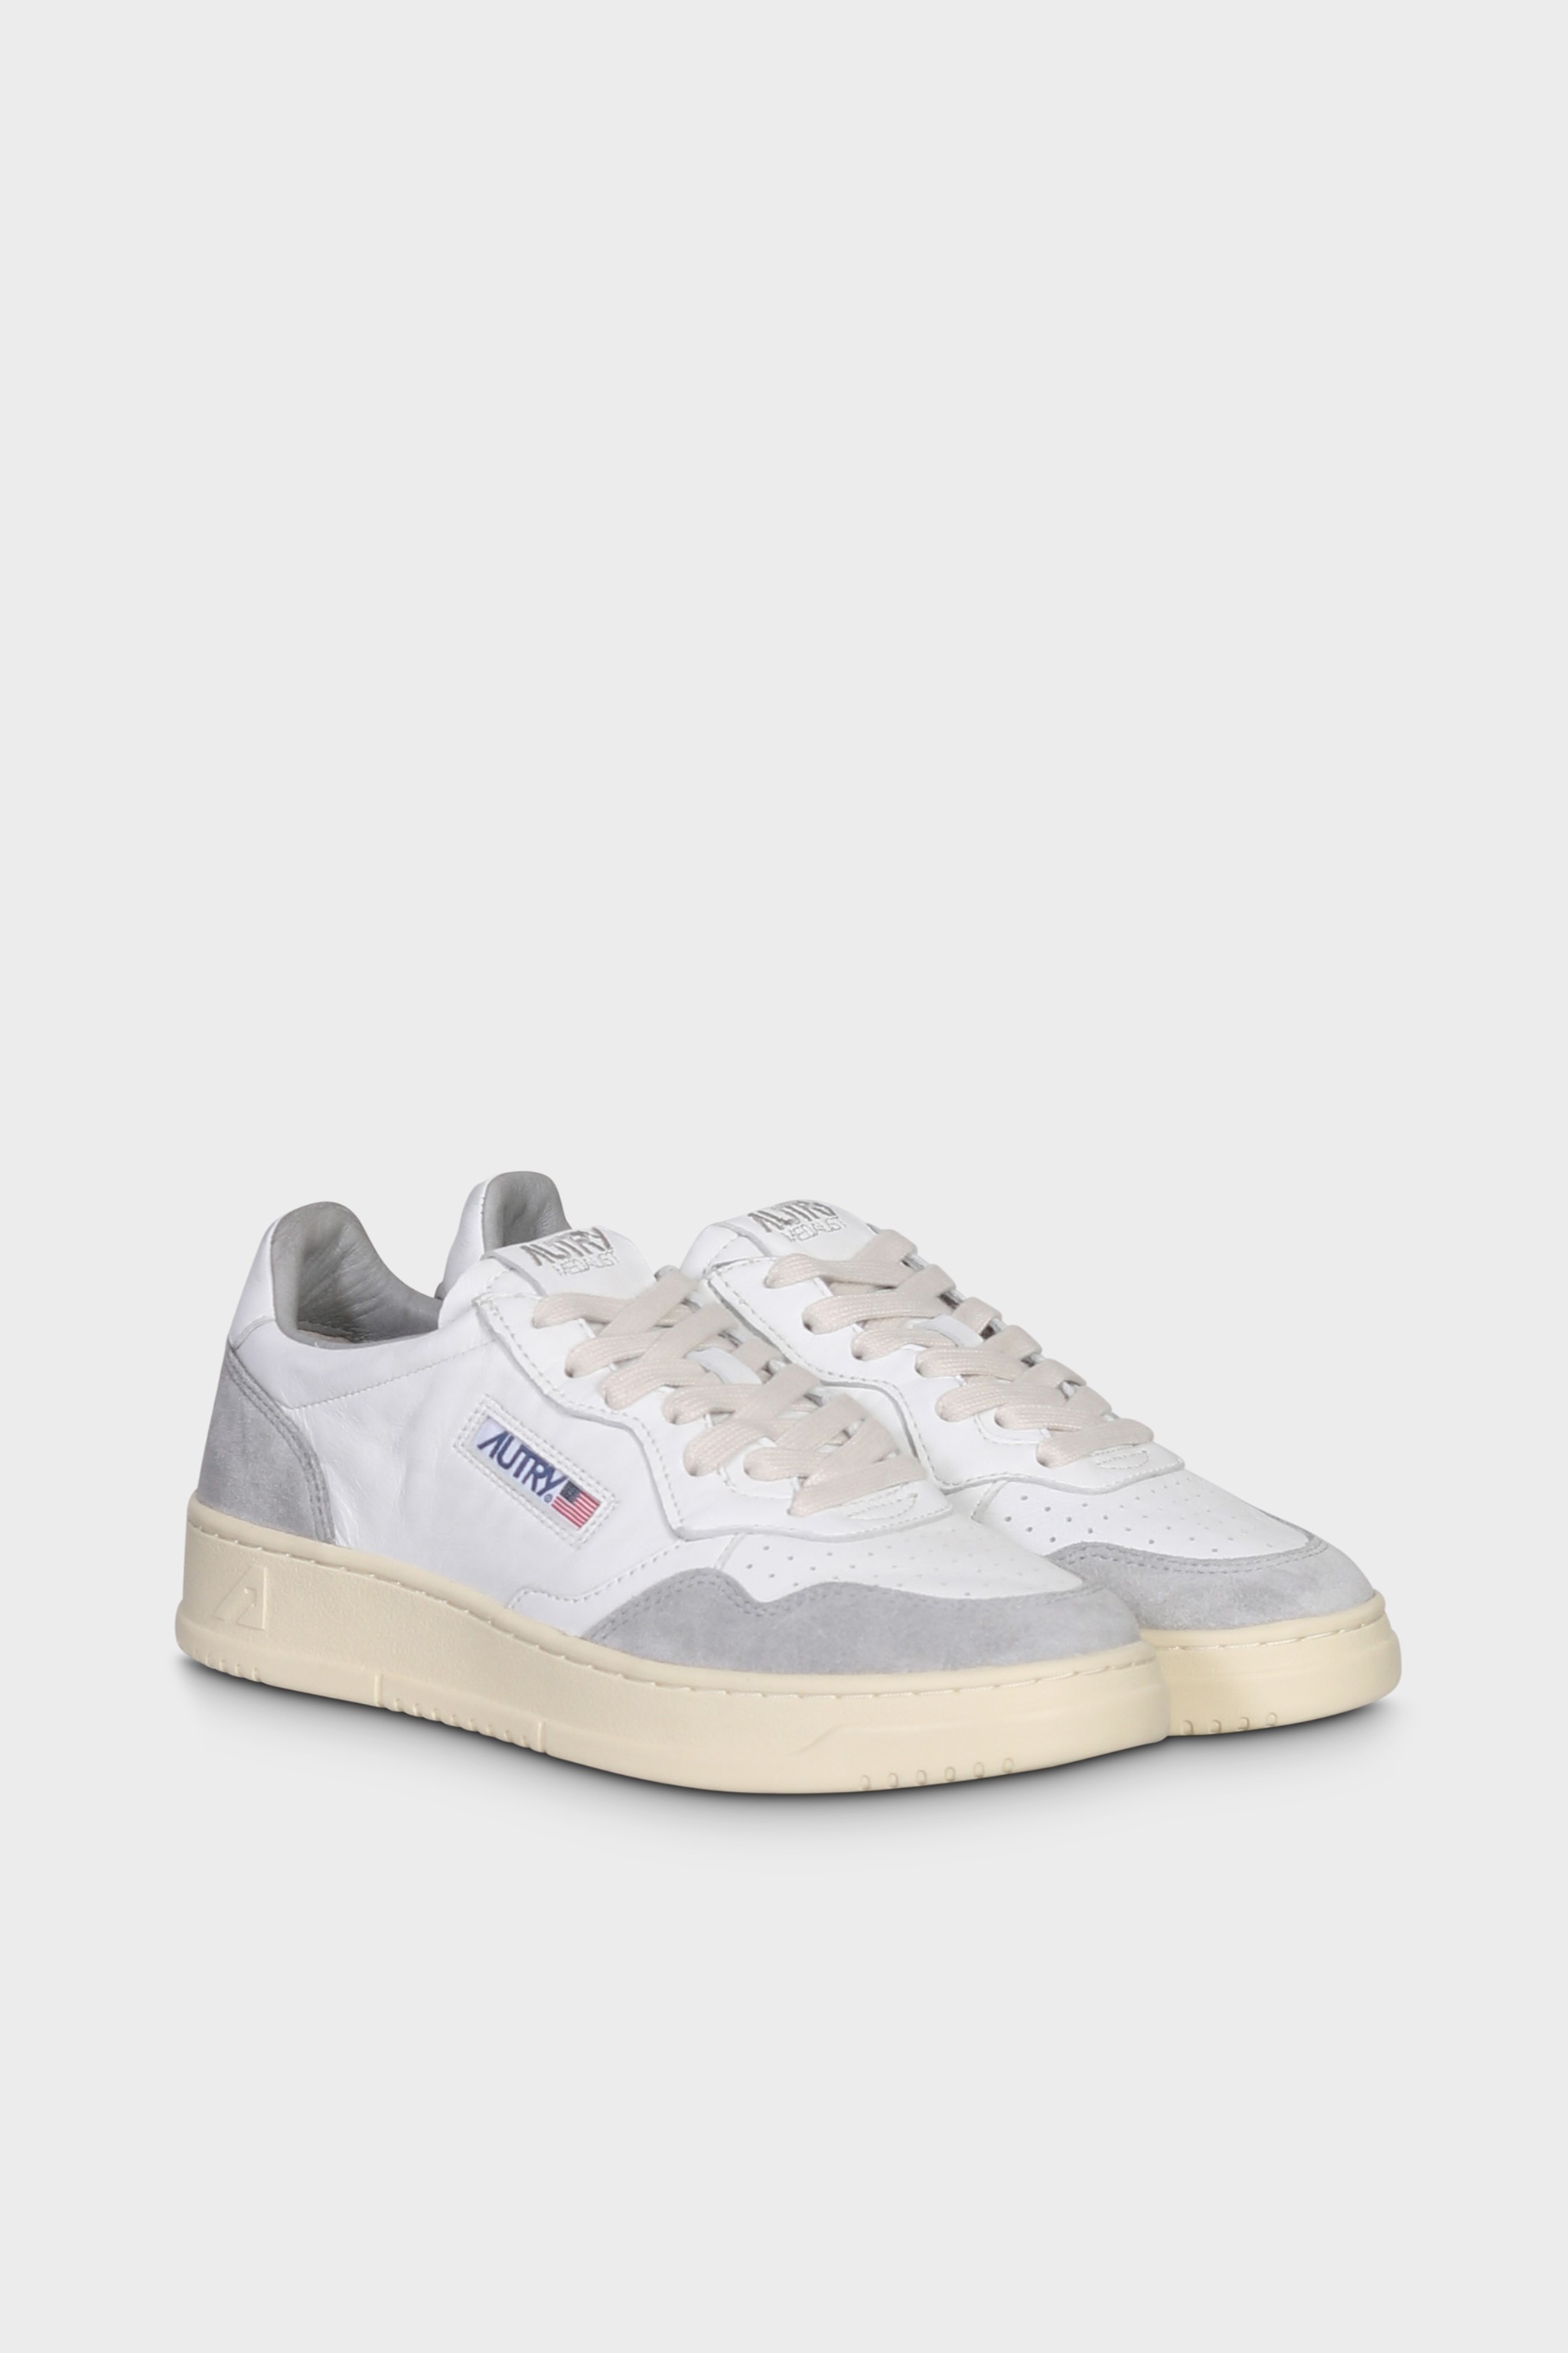 AUTRY ACTION SHOES Medalist Low Sneaker Goat Suede White/Grey 37